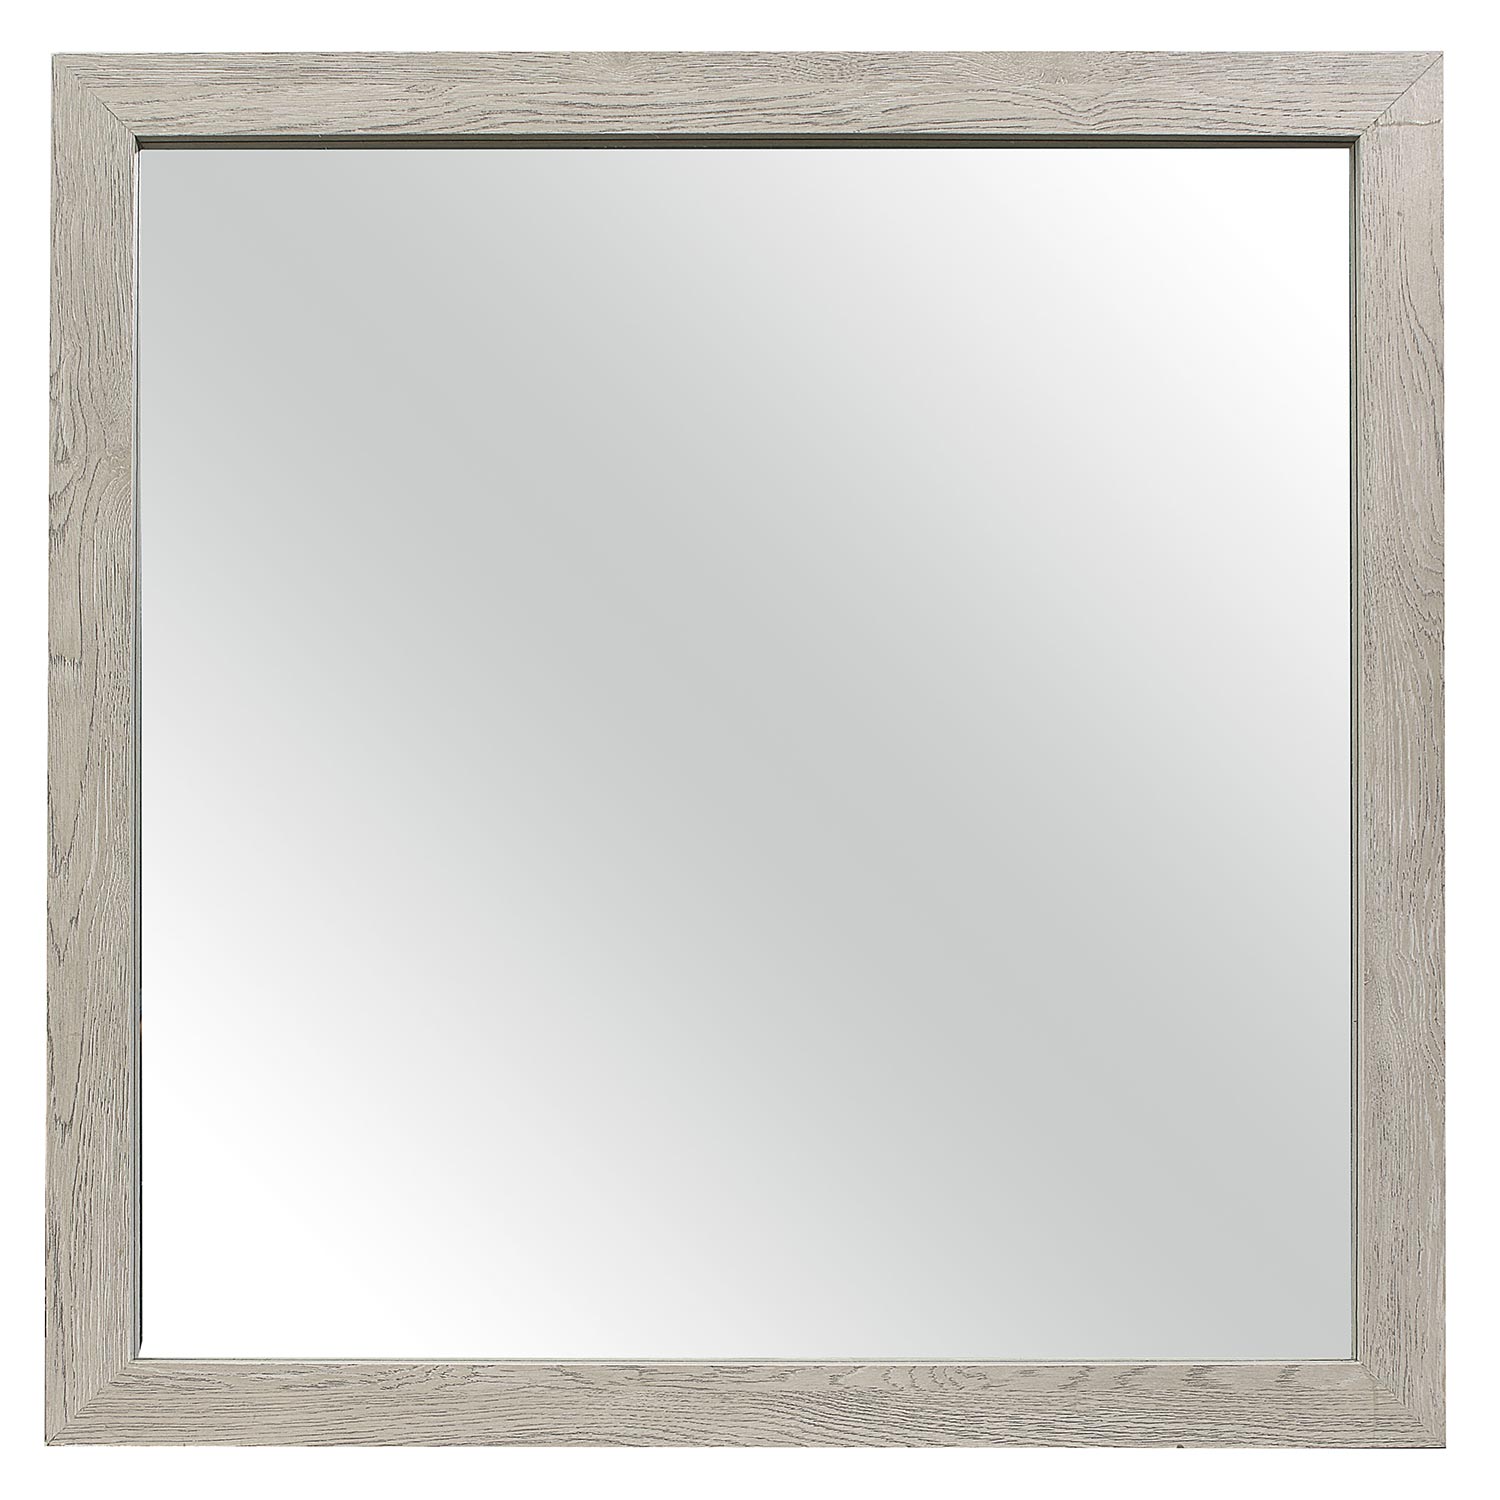 Homelegance Quinby Mirror - Light Gray